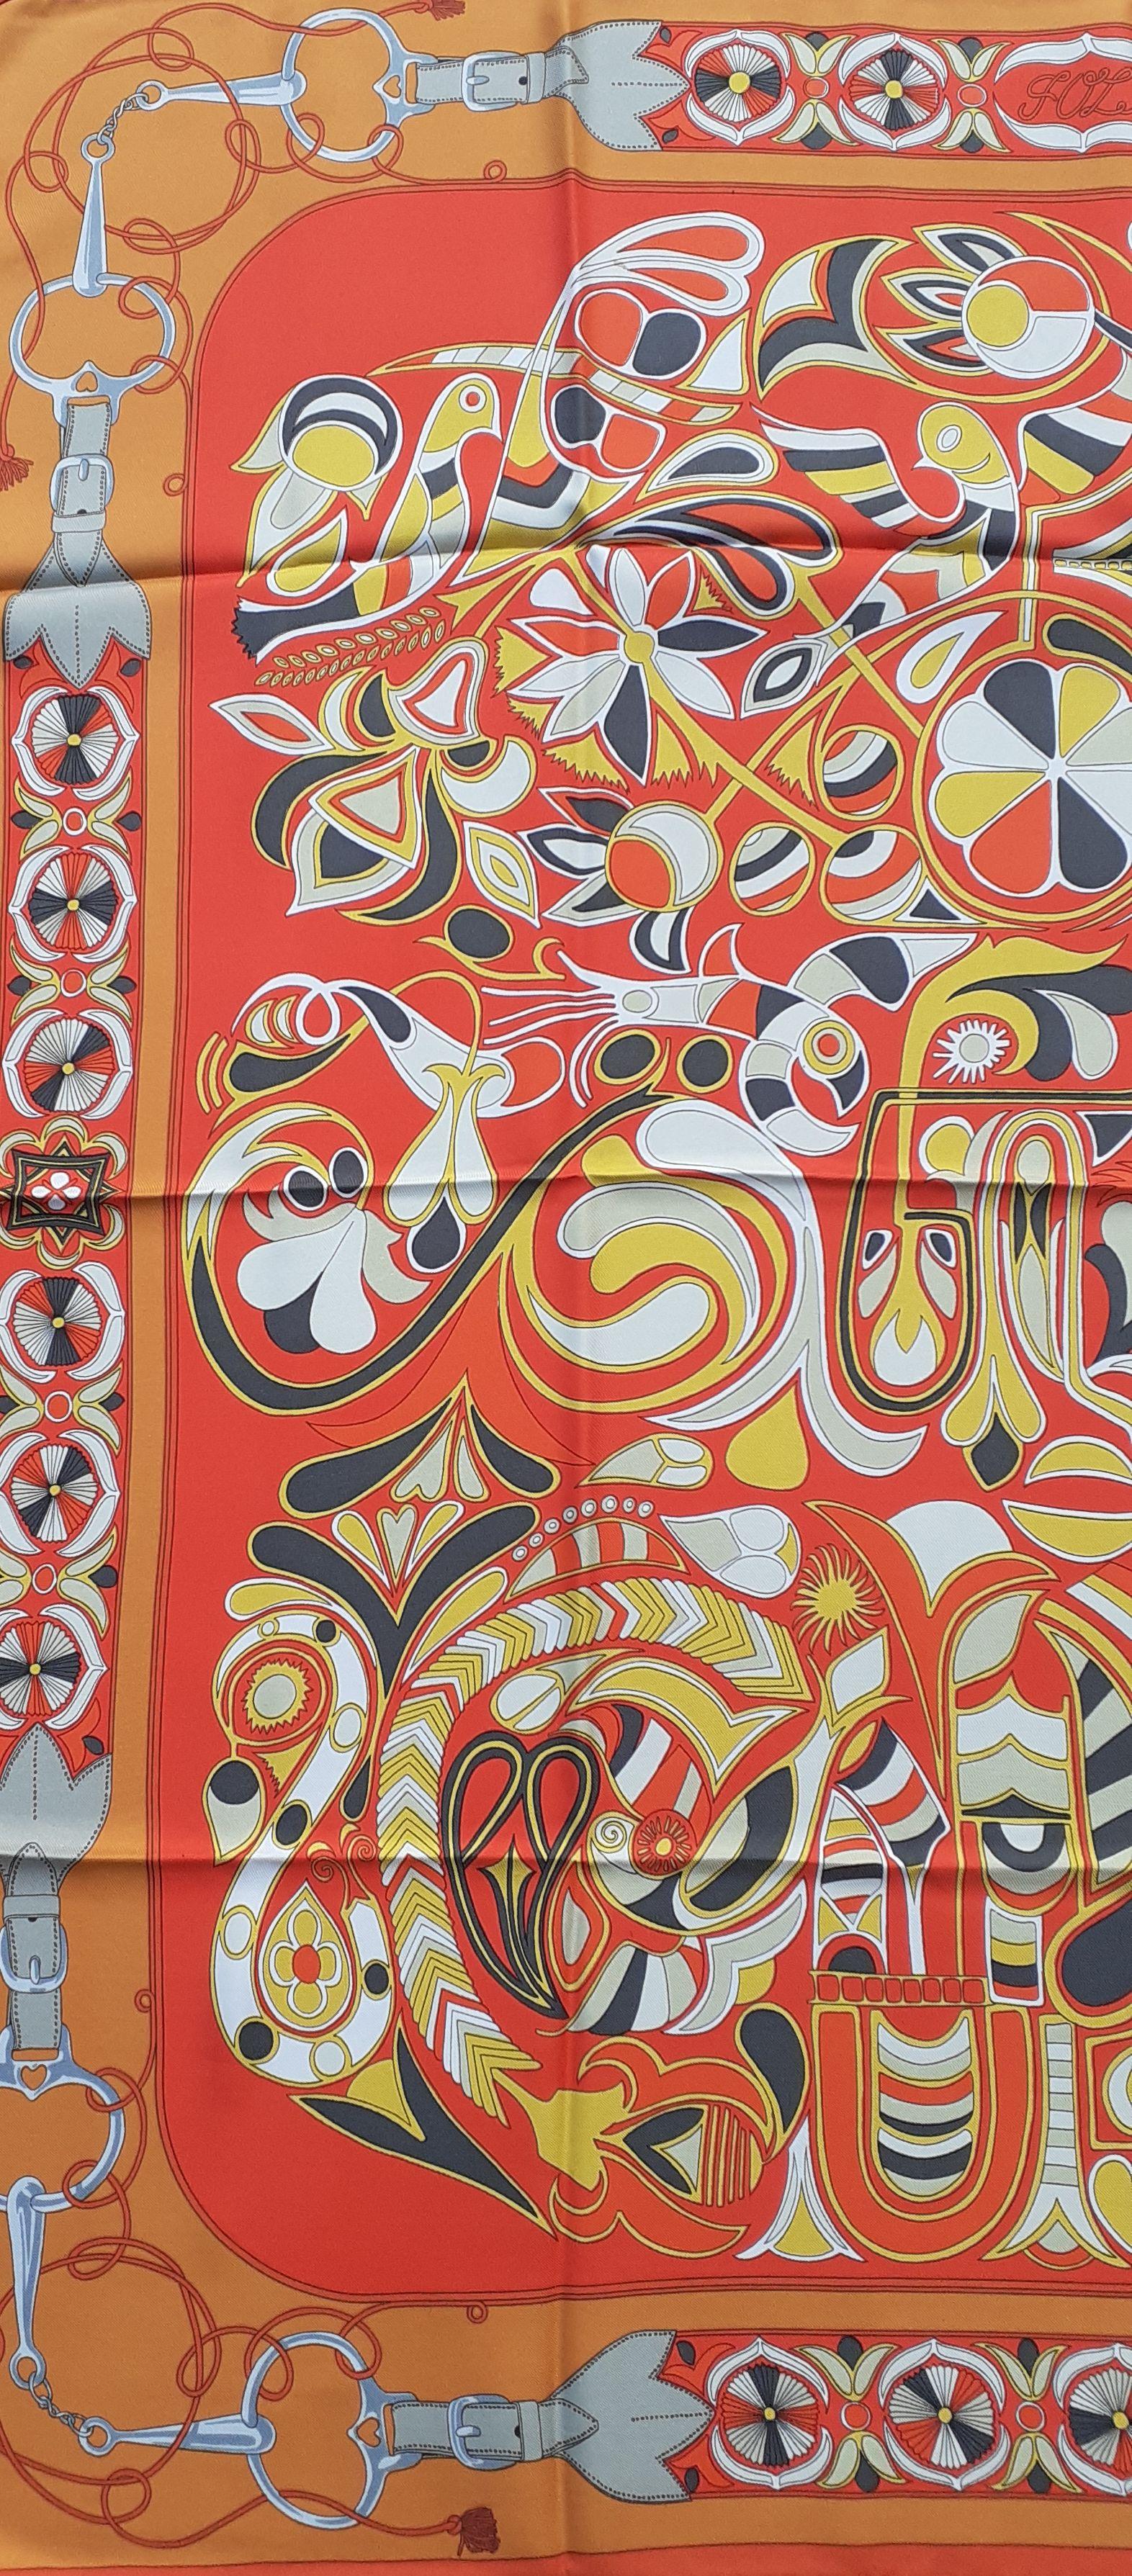 Rare and Gorgeous Authentic Hermès Scarf

Print: 